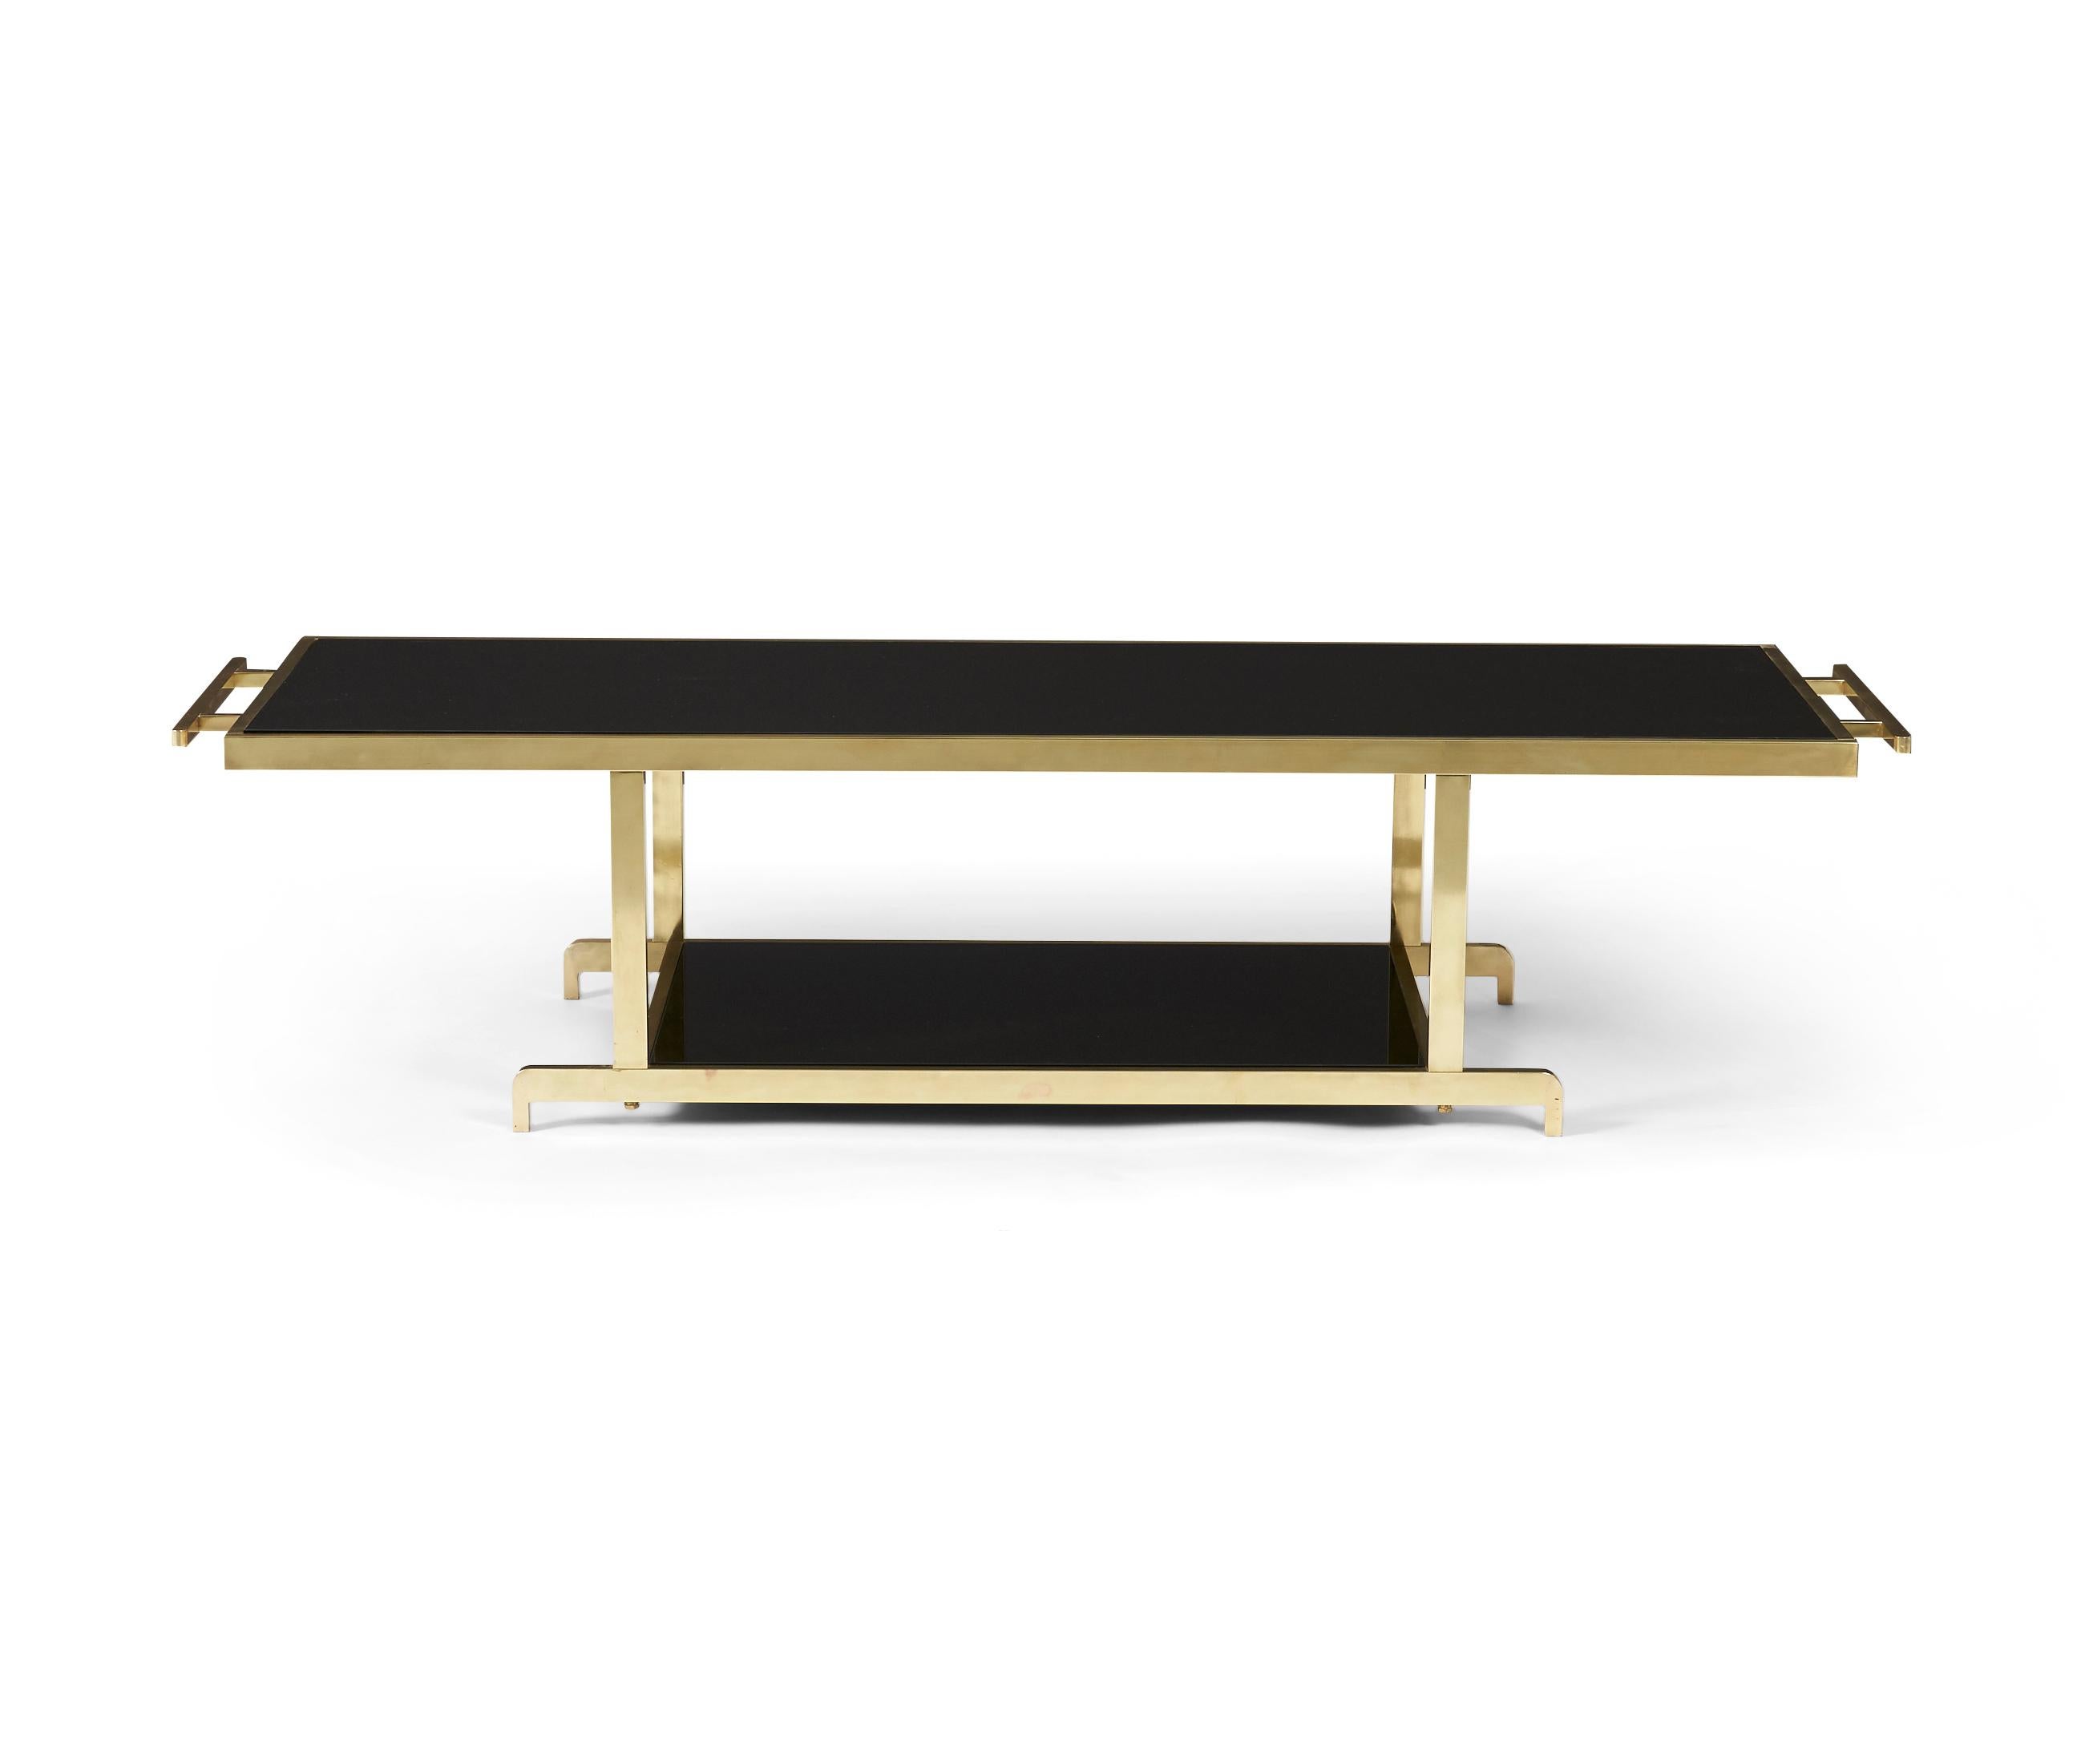 Chinoiserie coffee table by James Mont, circa 1950s. Heavy, very well made, solid brass base with black glass. Fully restored polished brass with new glass.